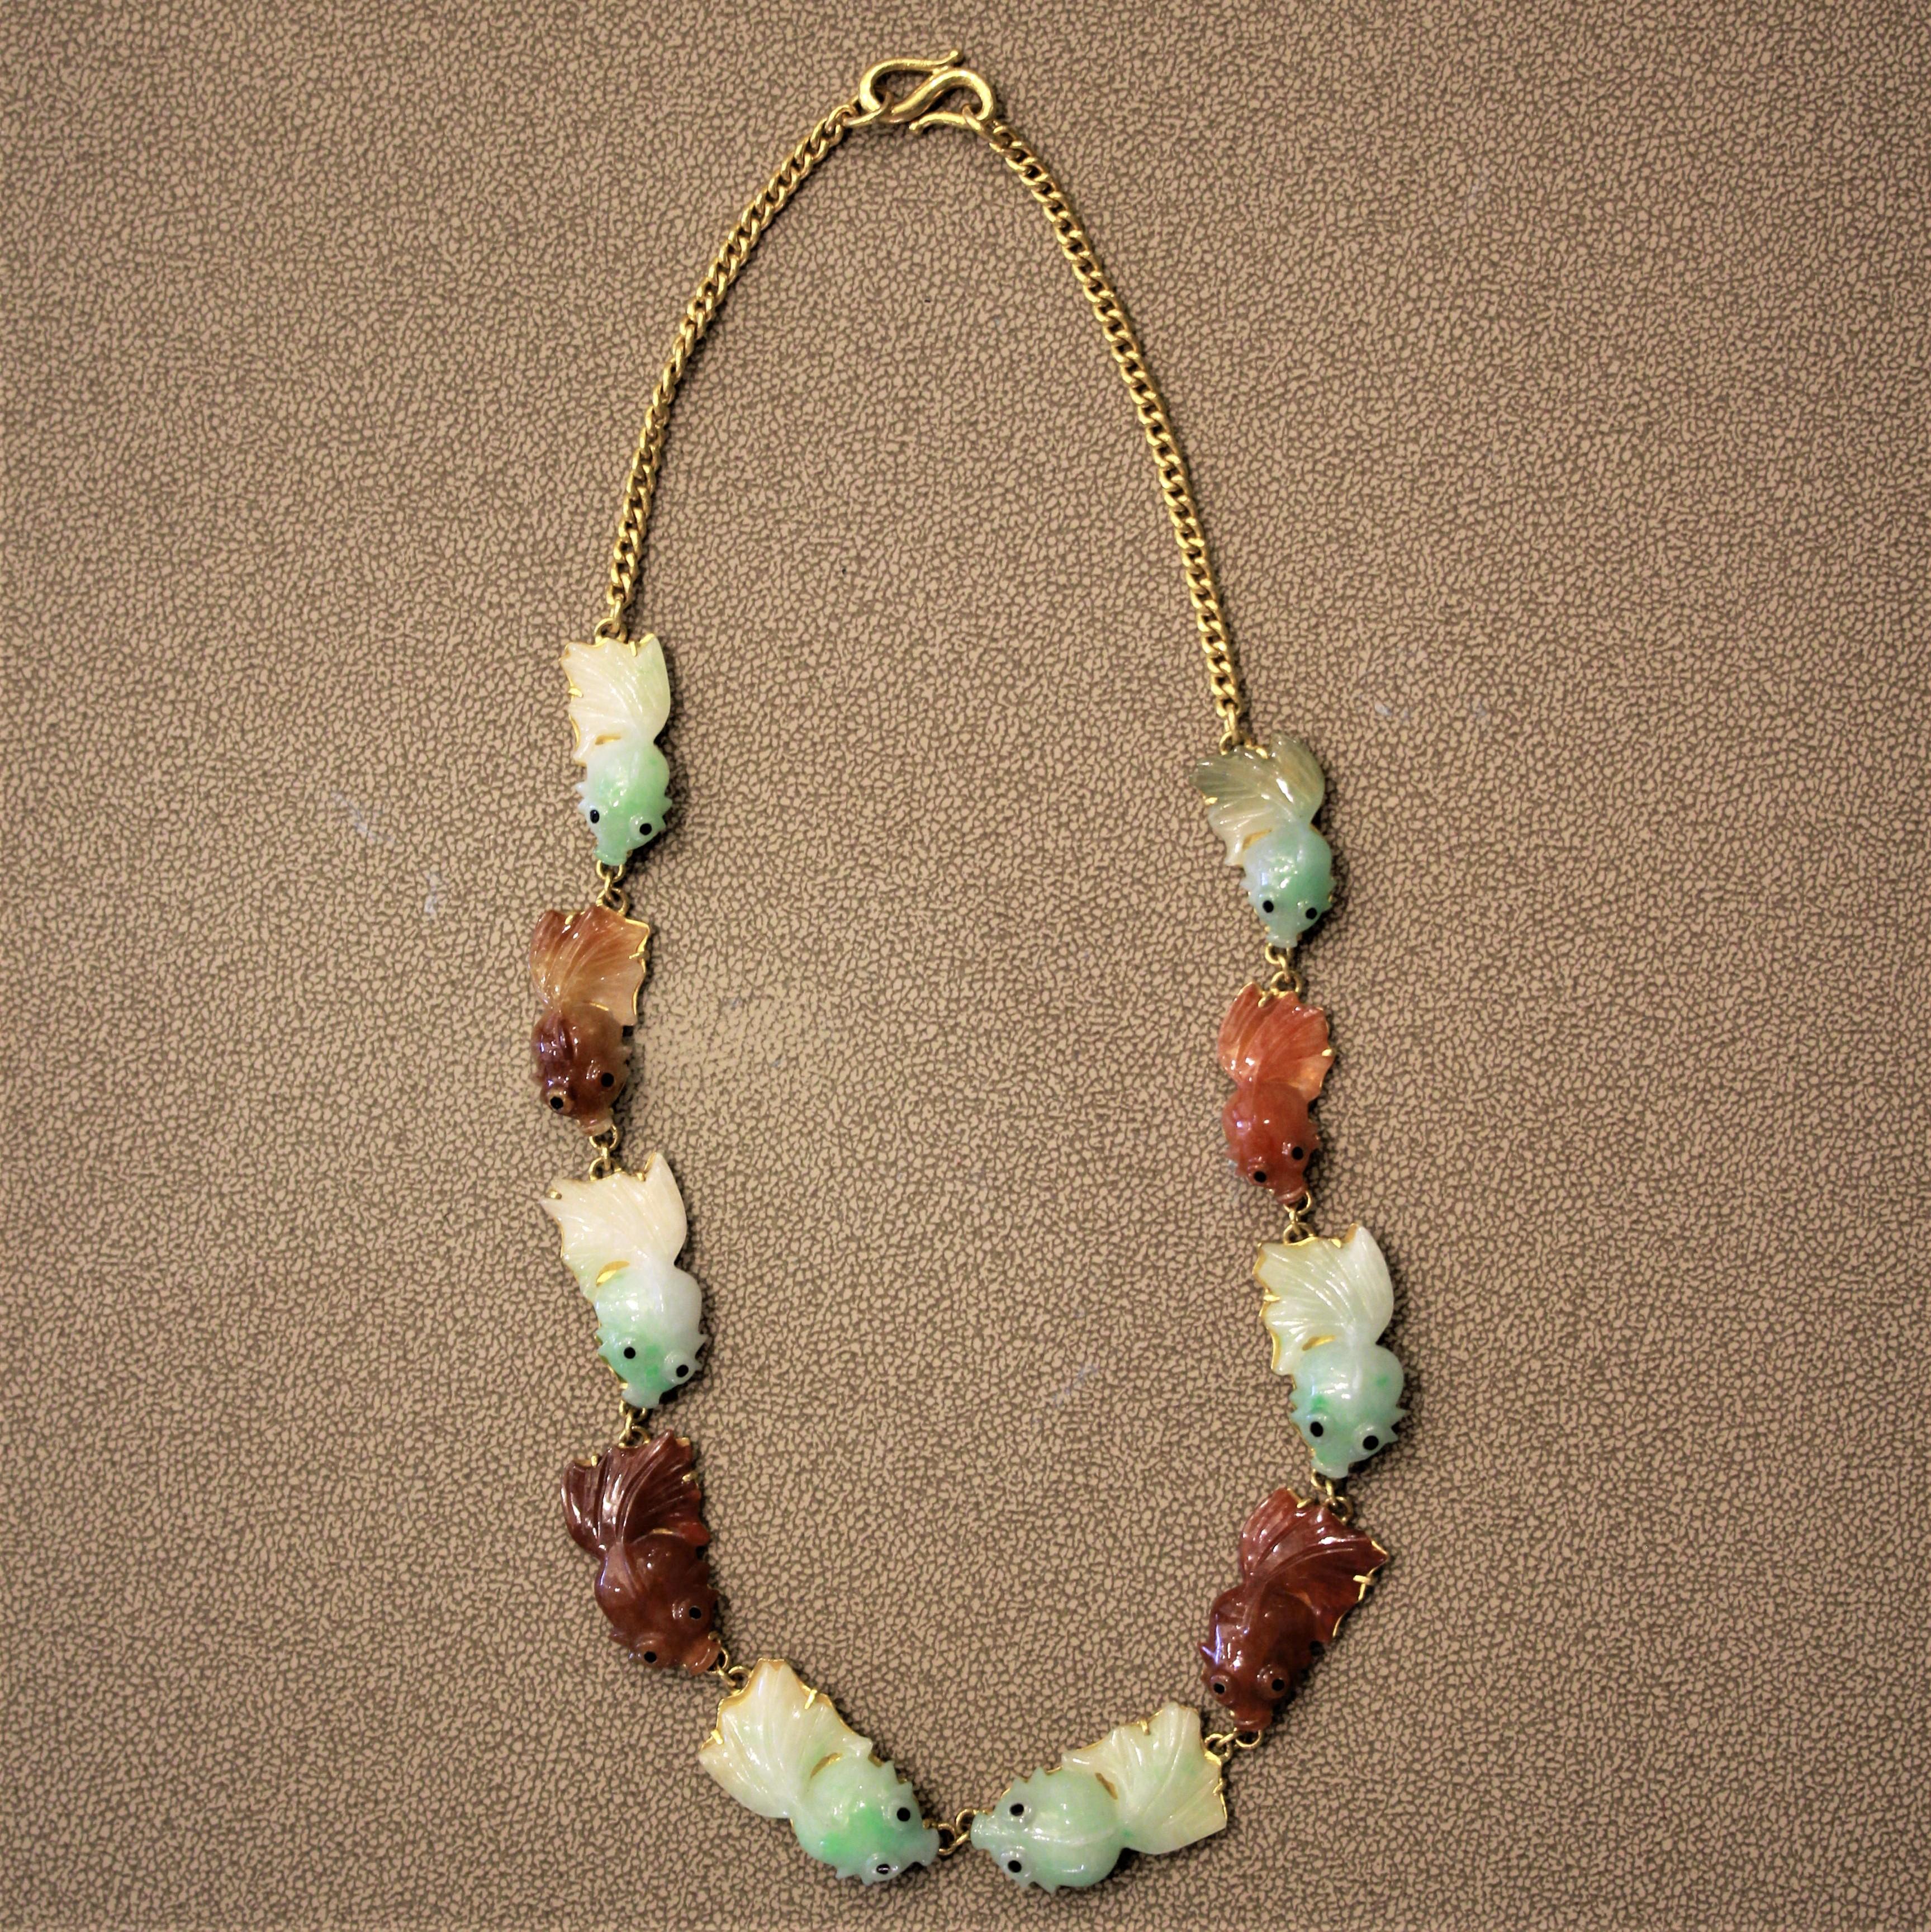 A unique necklace featuring 10 pieces of jade carvings for fanciful fish! Six of them are green while the other four are an orangy-red colored jadeite jade. The necklace was made using 22k gold, as it can be seen in the color of the gold. The clasp,